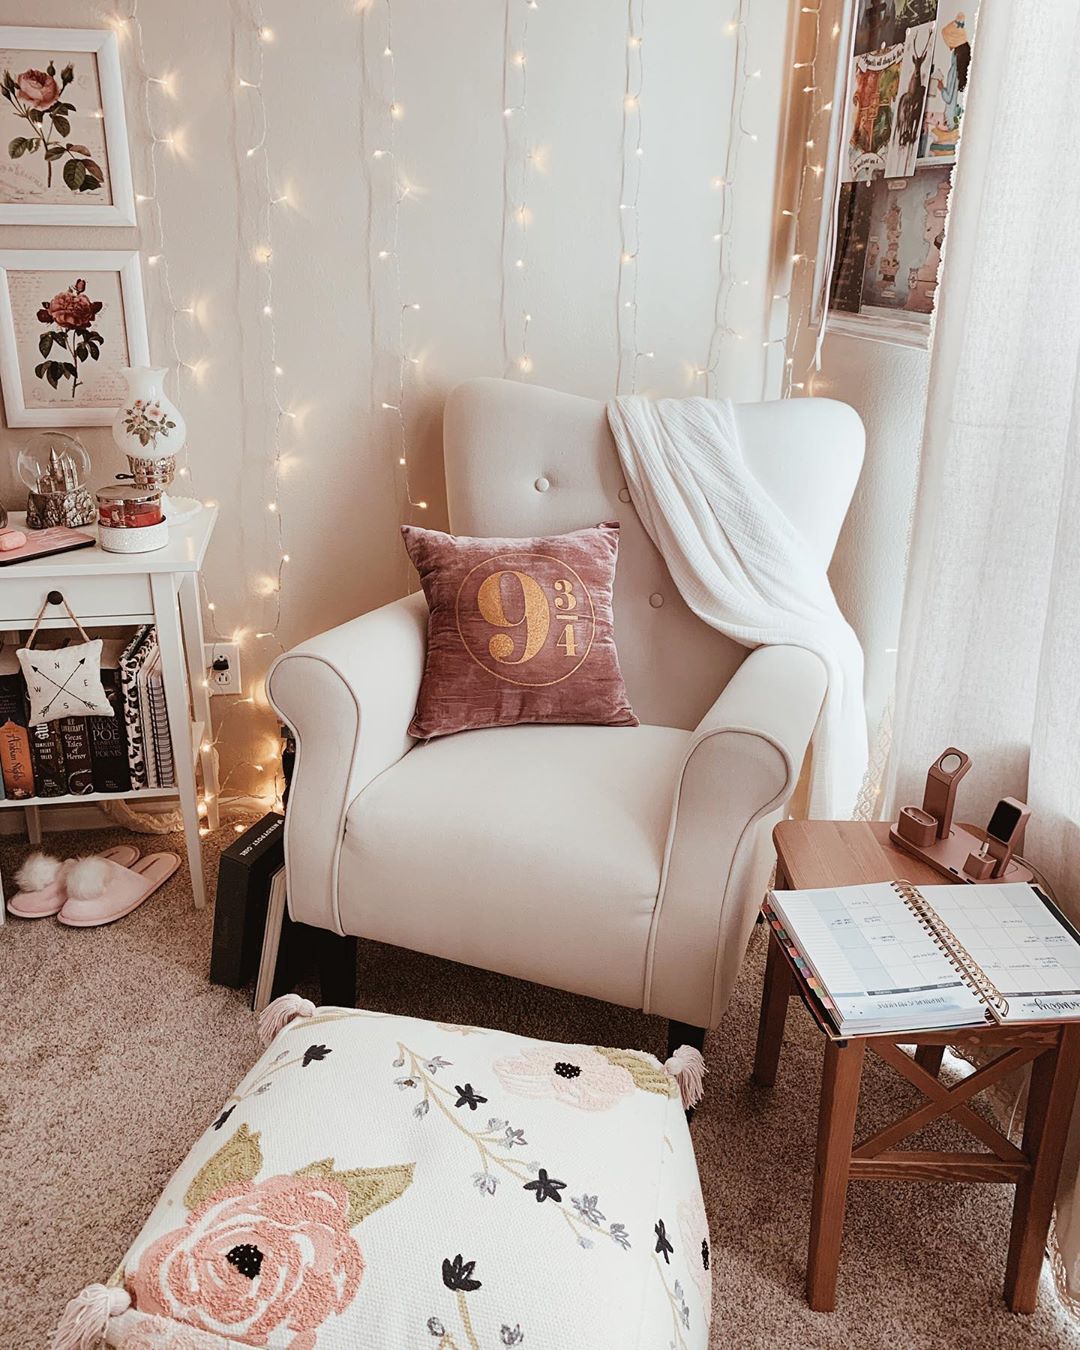 Reading Chair Set Up with Harry Potter Themed Pillow and White Blanket with String Lights on the Wall. Photo by Instagram user @everlasting.charm